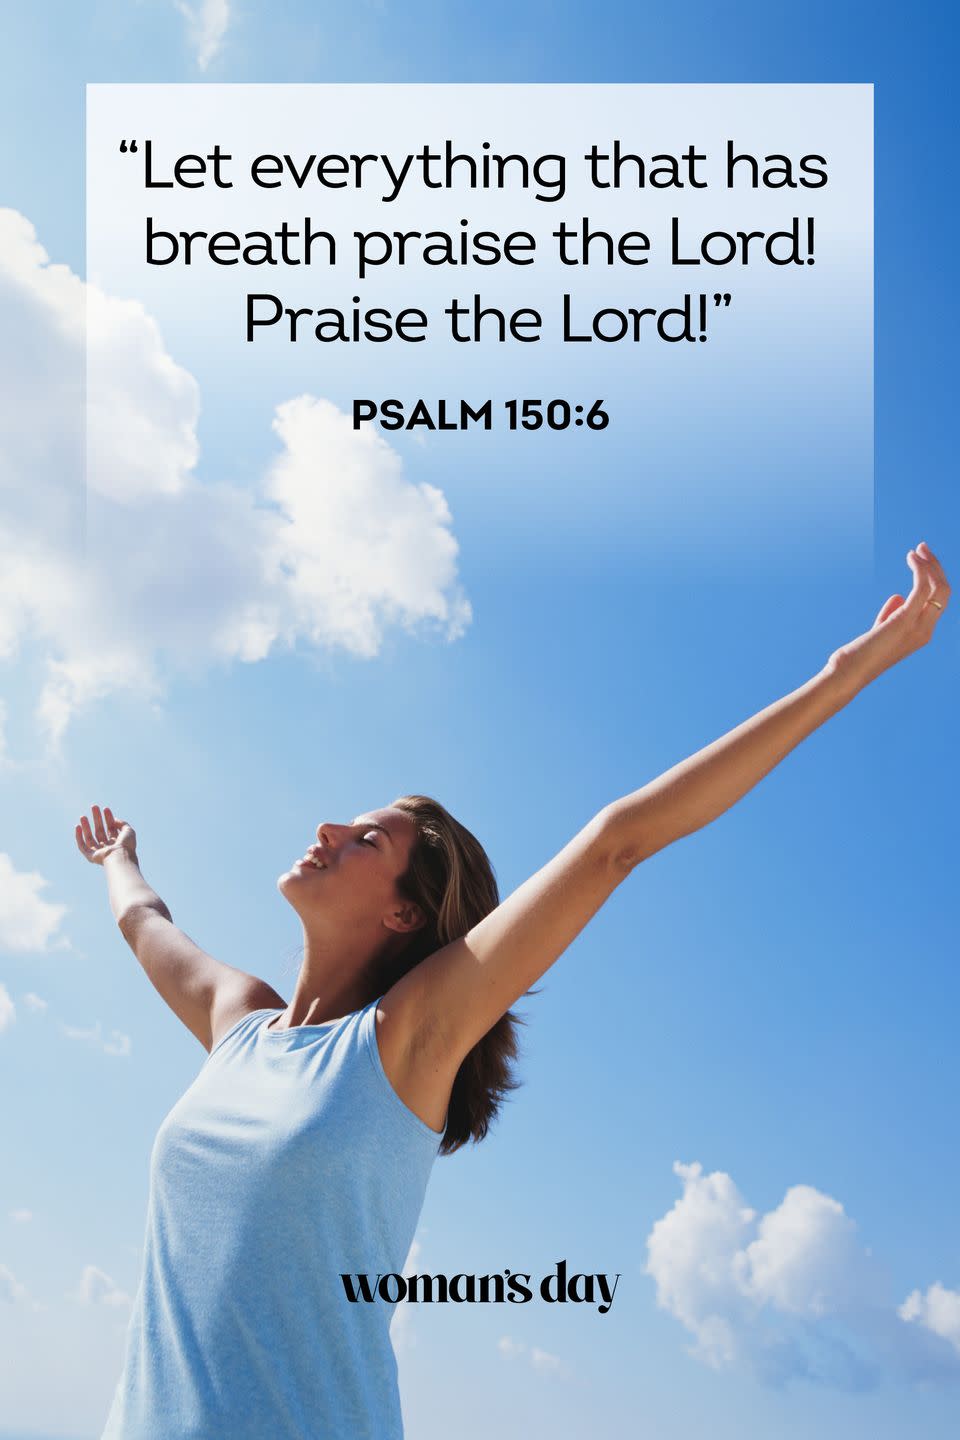 <p>"Let everything that has breath praise the Lord! Praise the Lord!"</p>